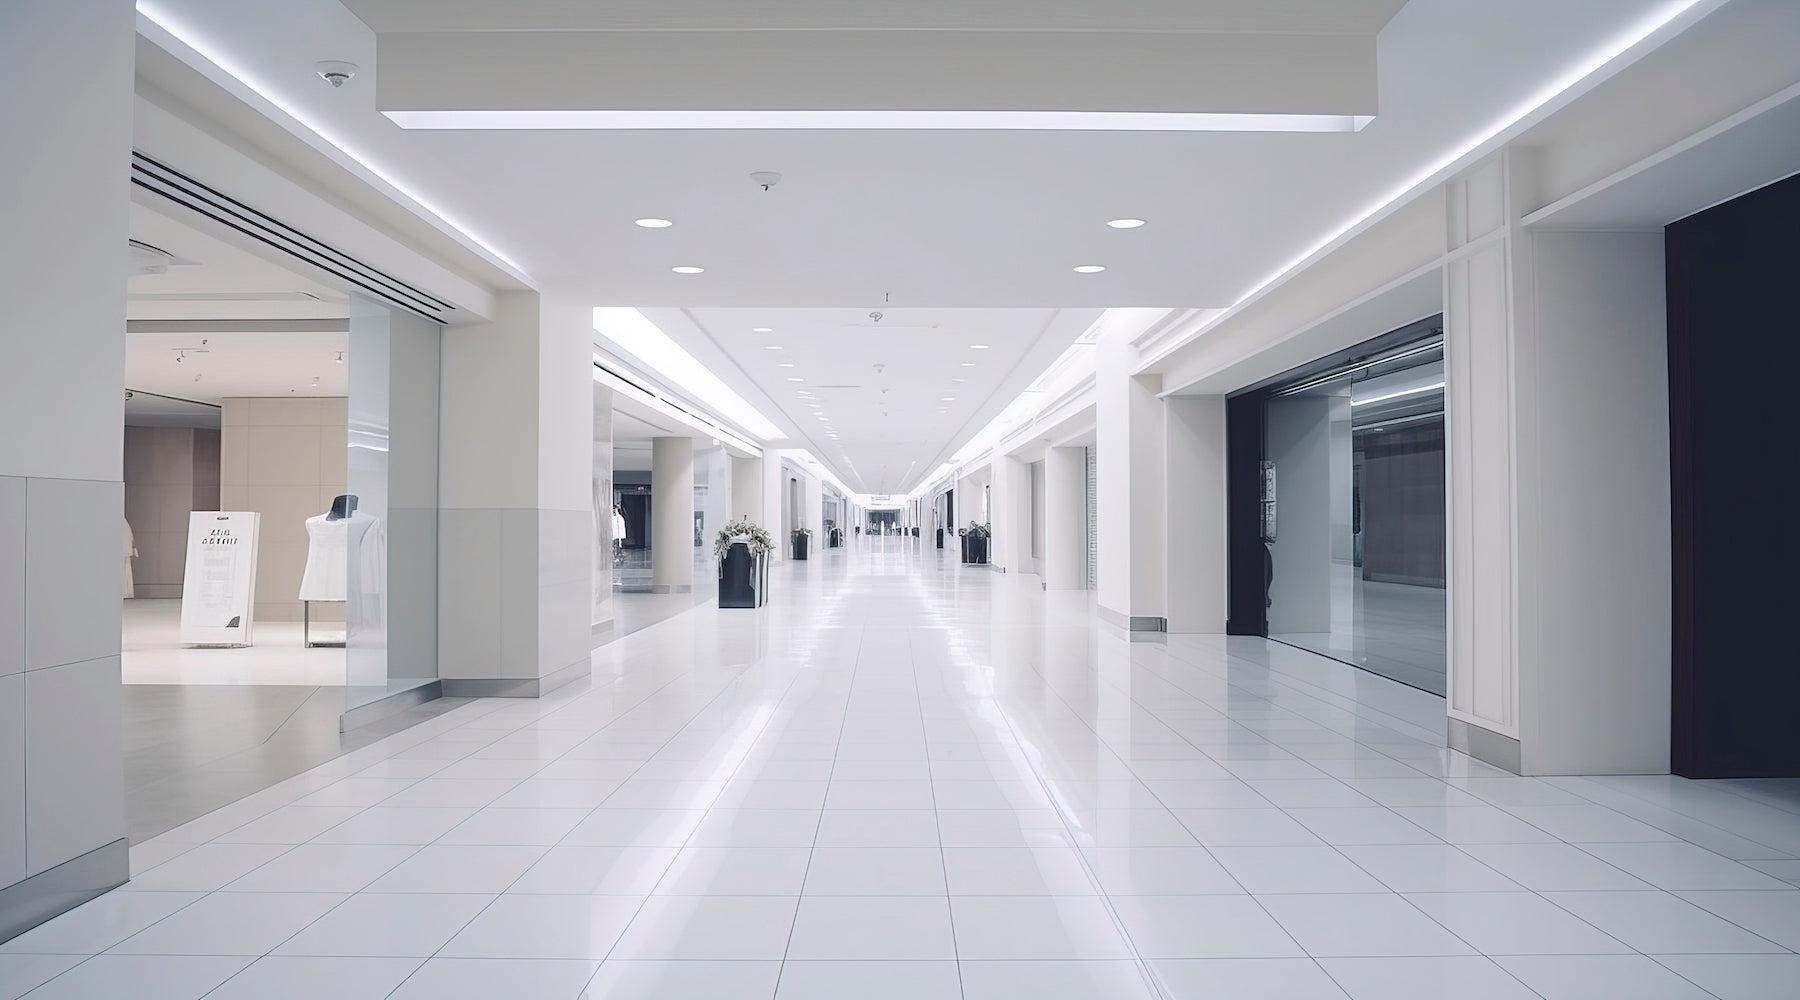 LED CFL retrofit lamps installed in recessed ceiling lights located in large shopping center